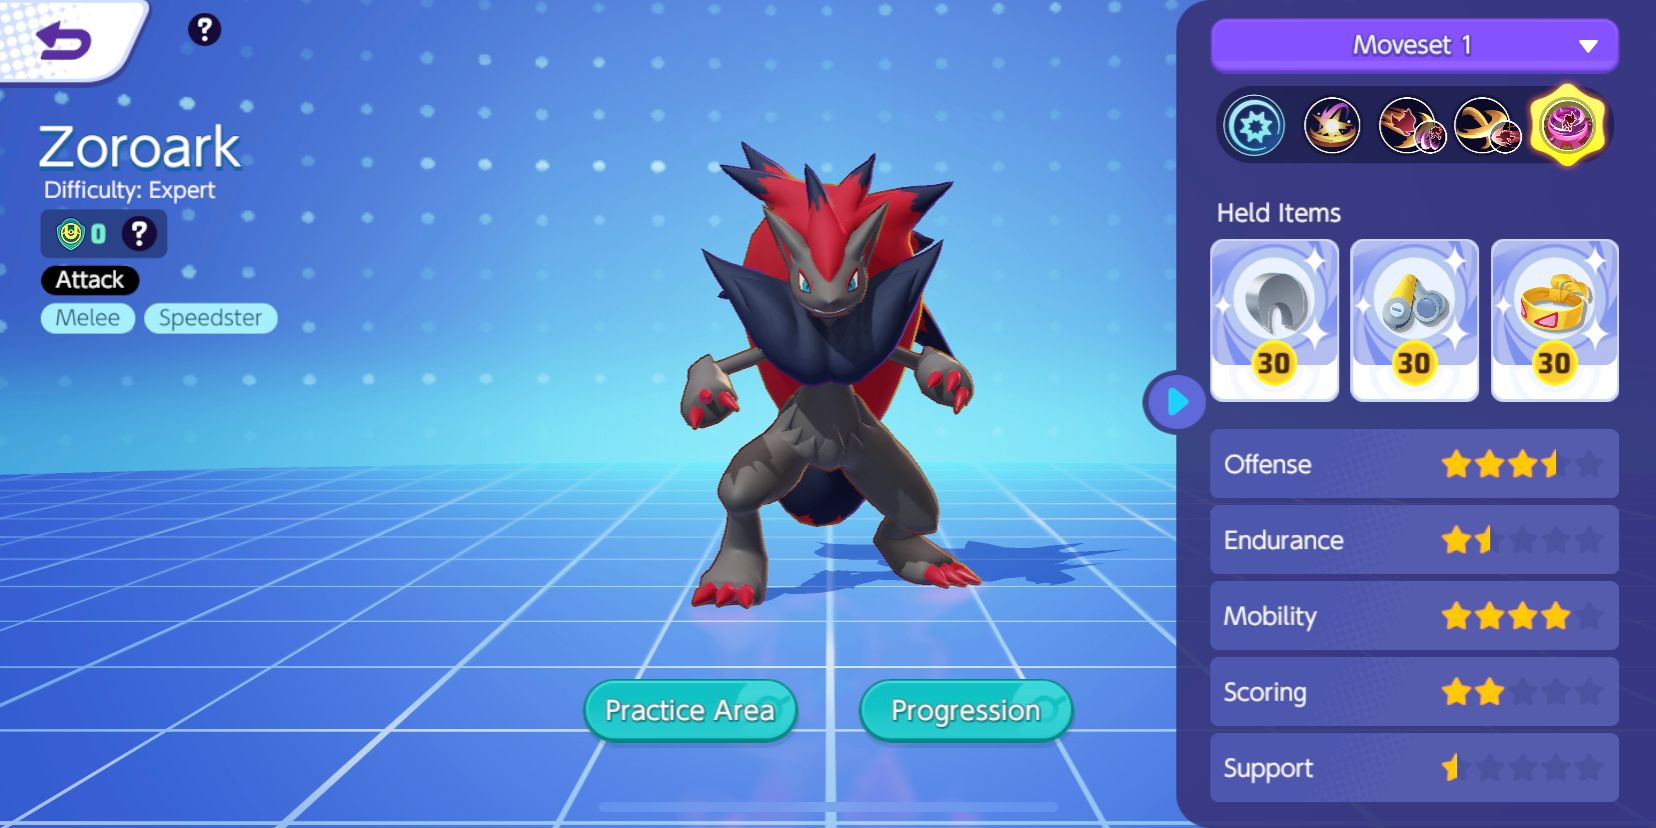 Zoroark from the Pokemon Unite character selection screen showing its stats and Held Items